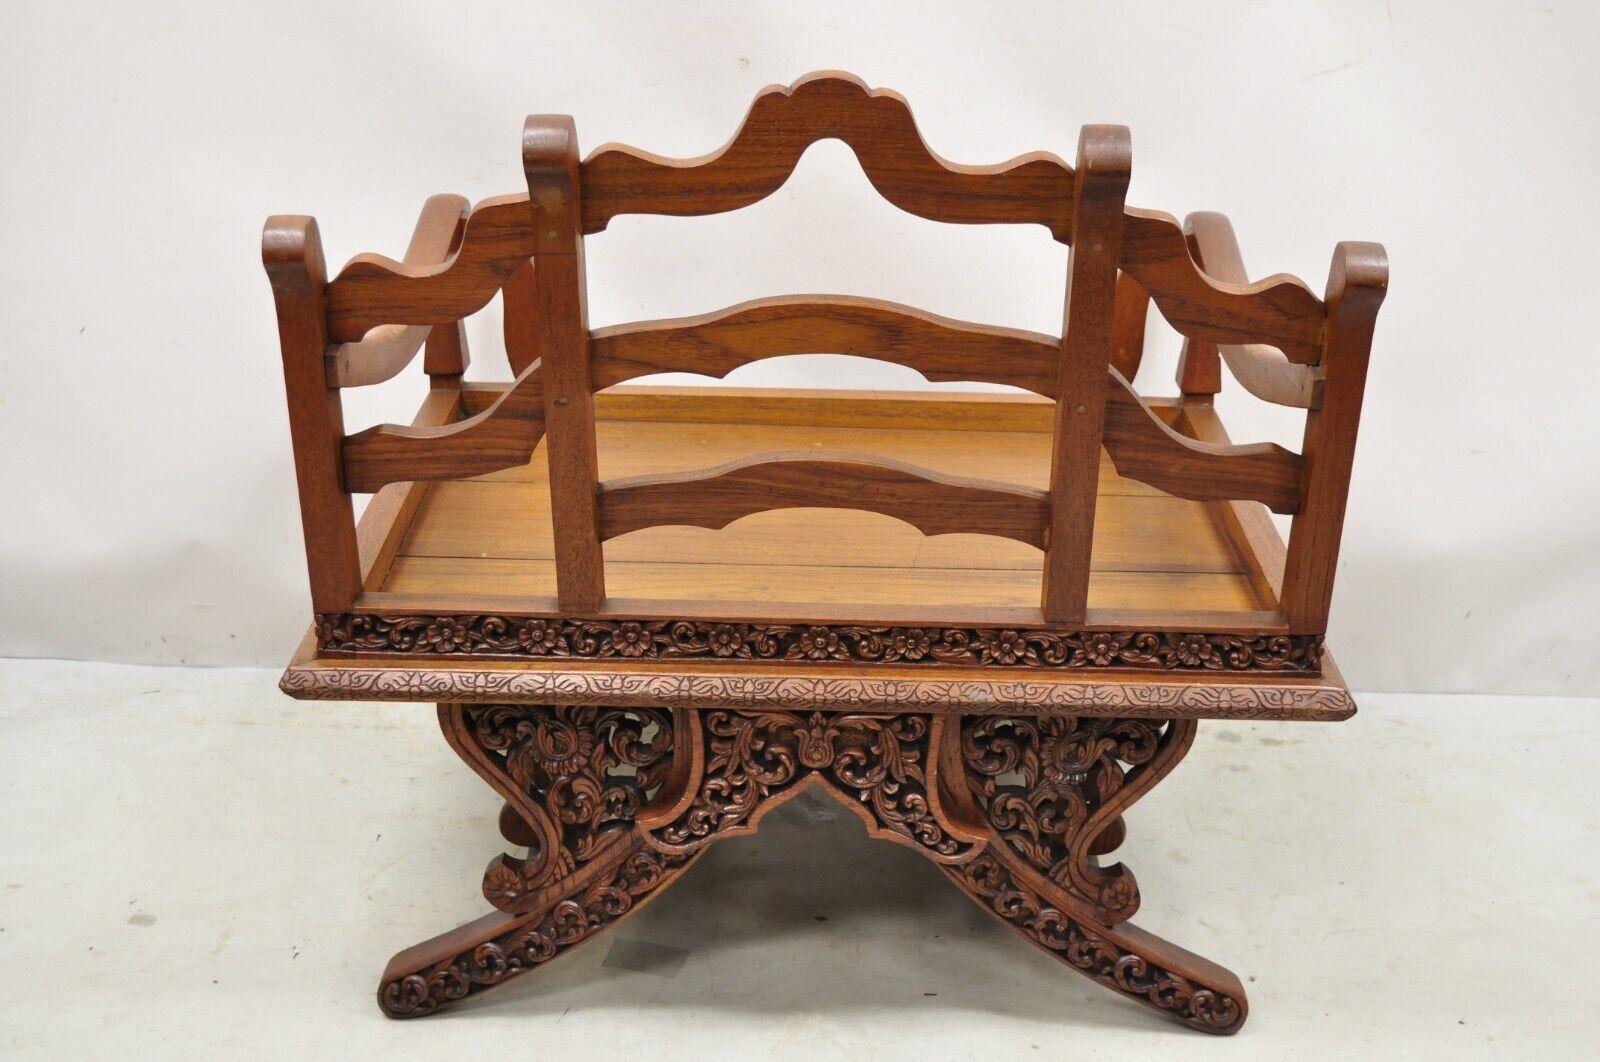 Vintage Chinoiserie Carved Teak Wood Howdah Elephant Saddle Accent Chair For Sale 4